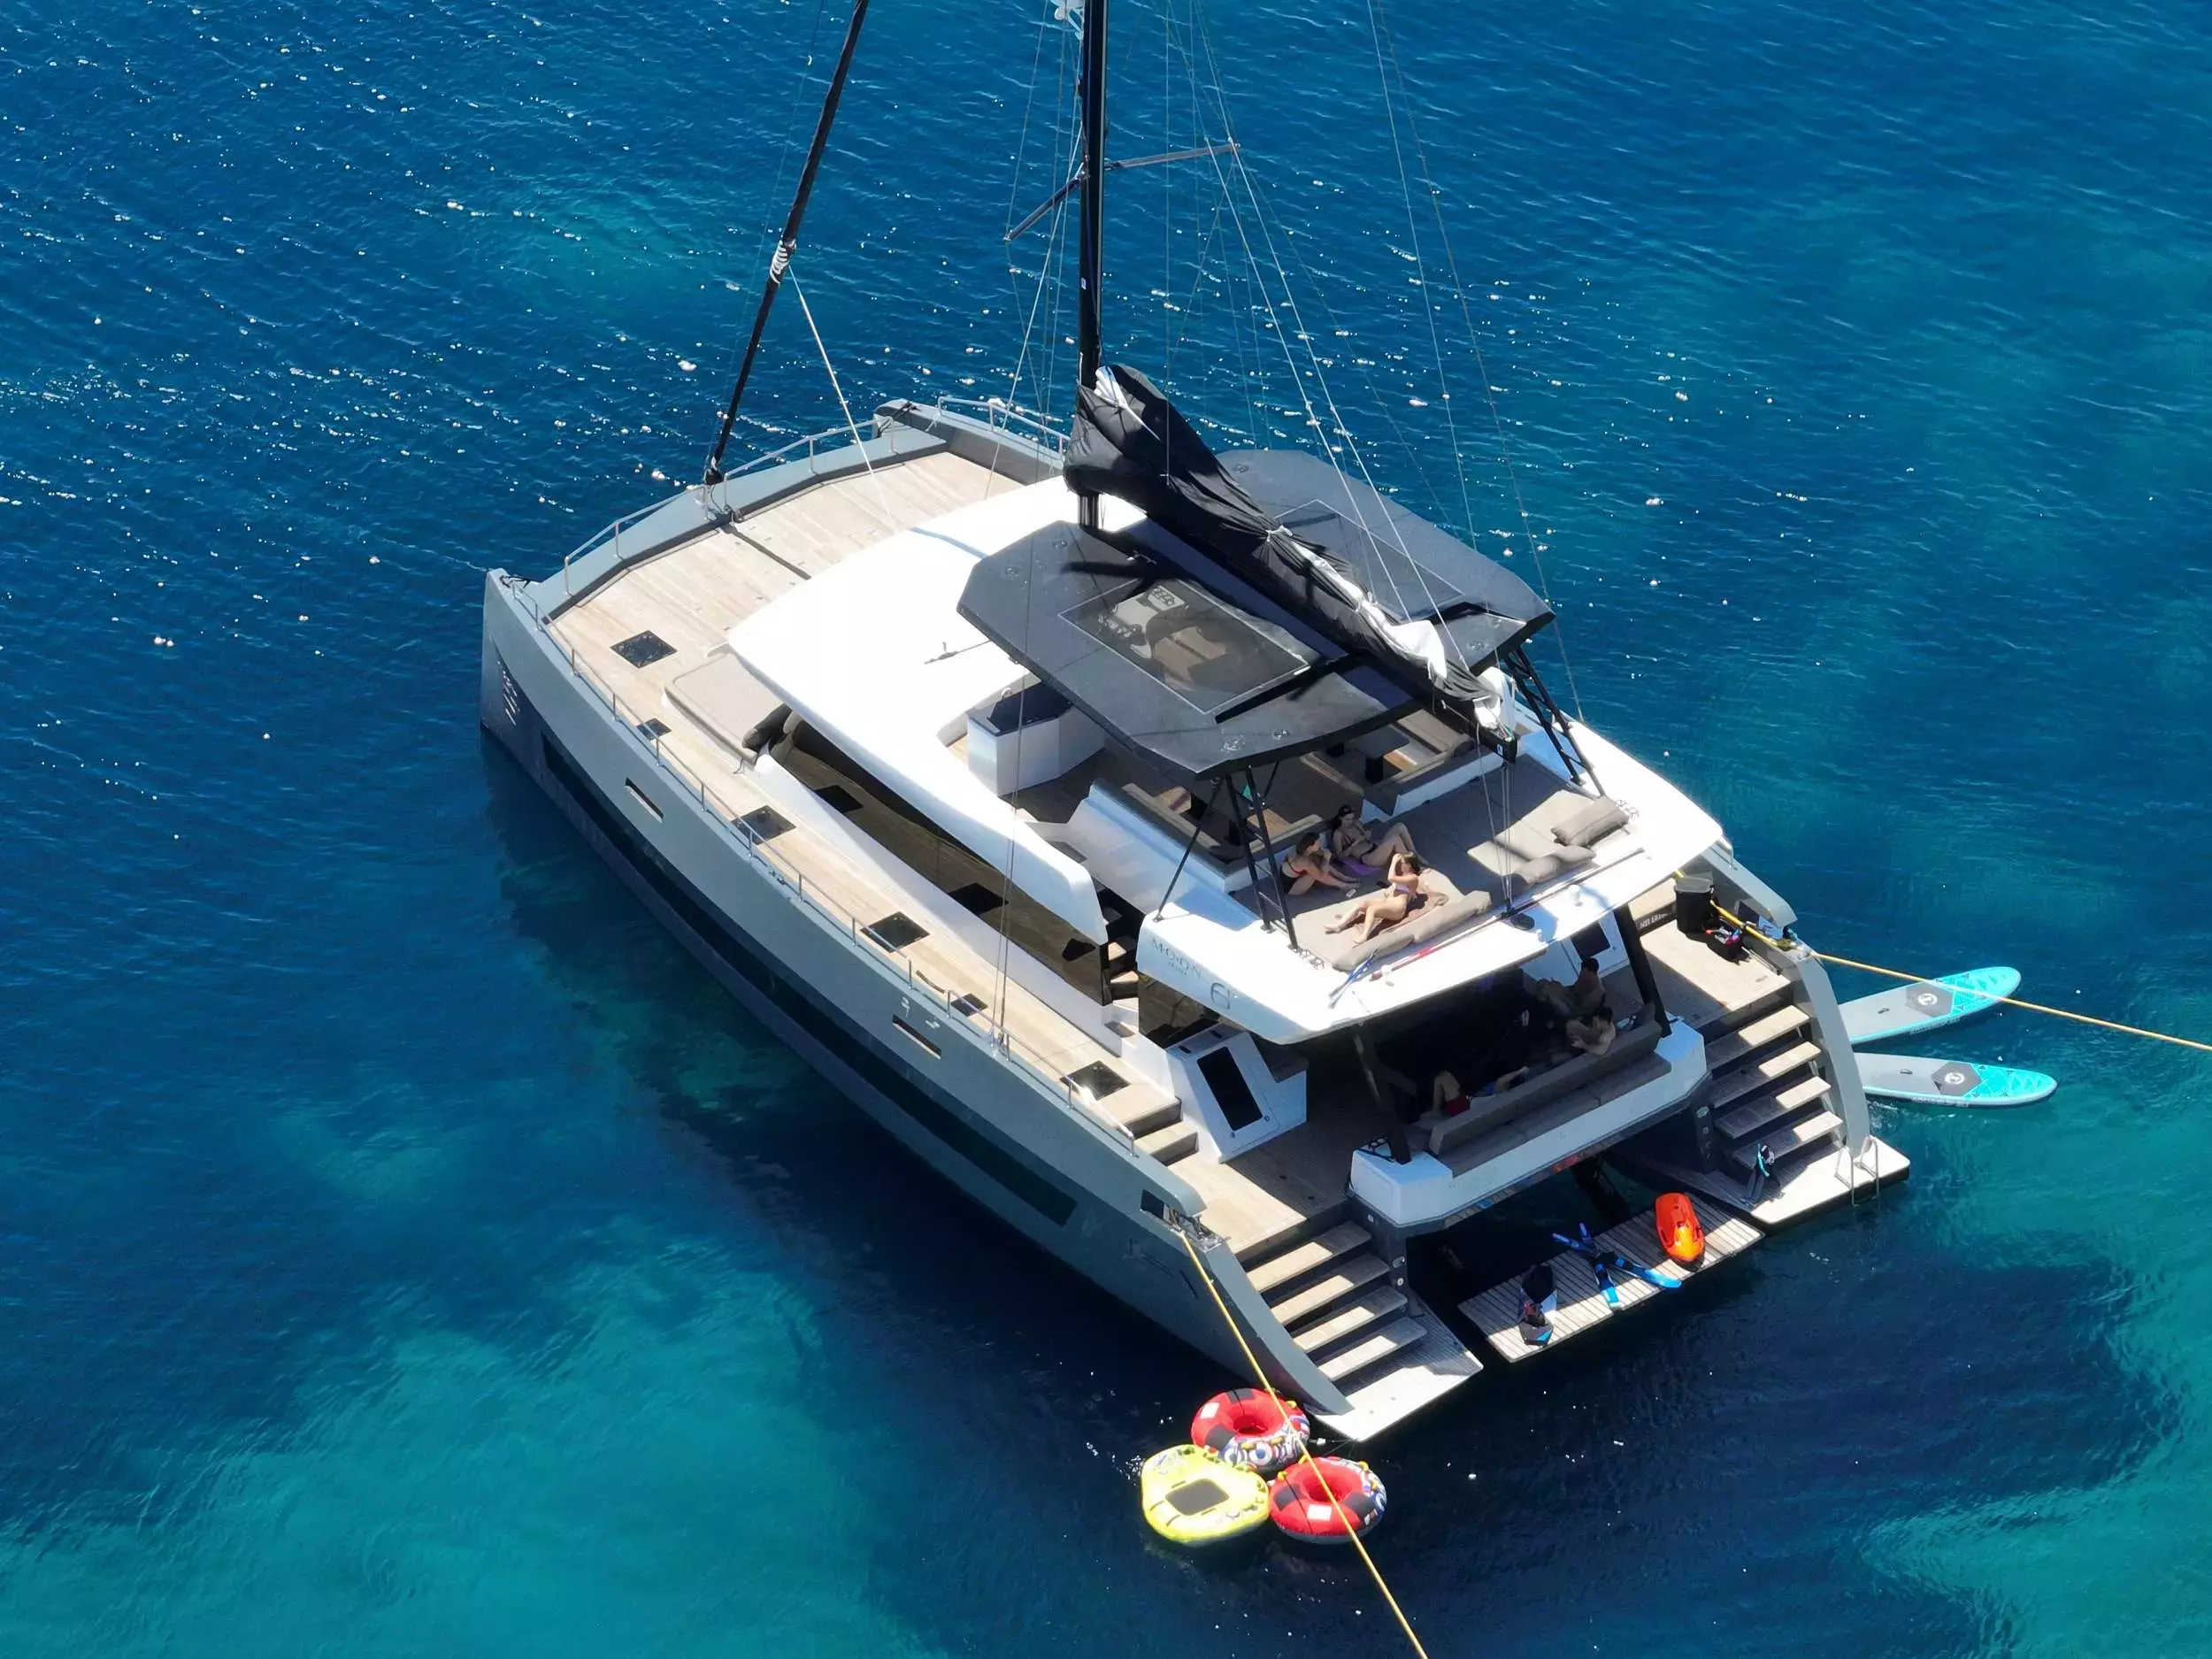 Moonlight by Moon - Top rates for a Rental of a private Luxury Catamaran in Greece